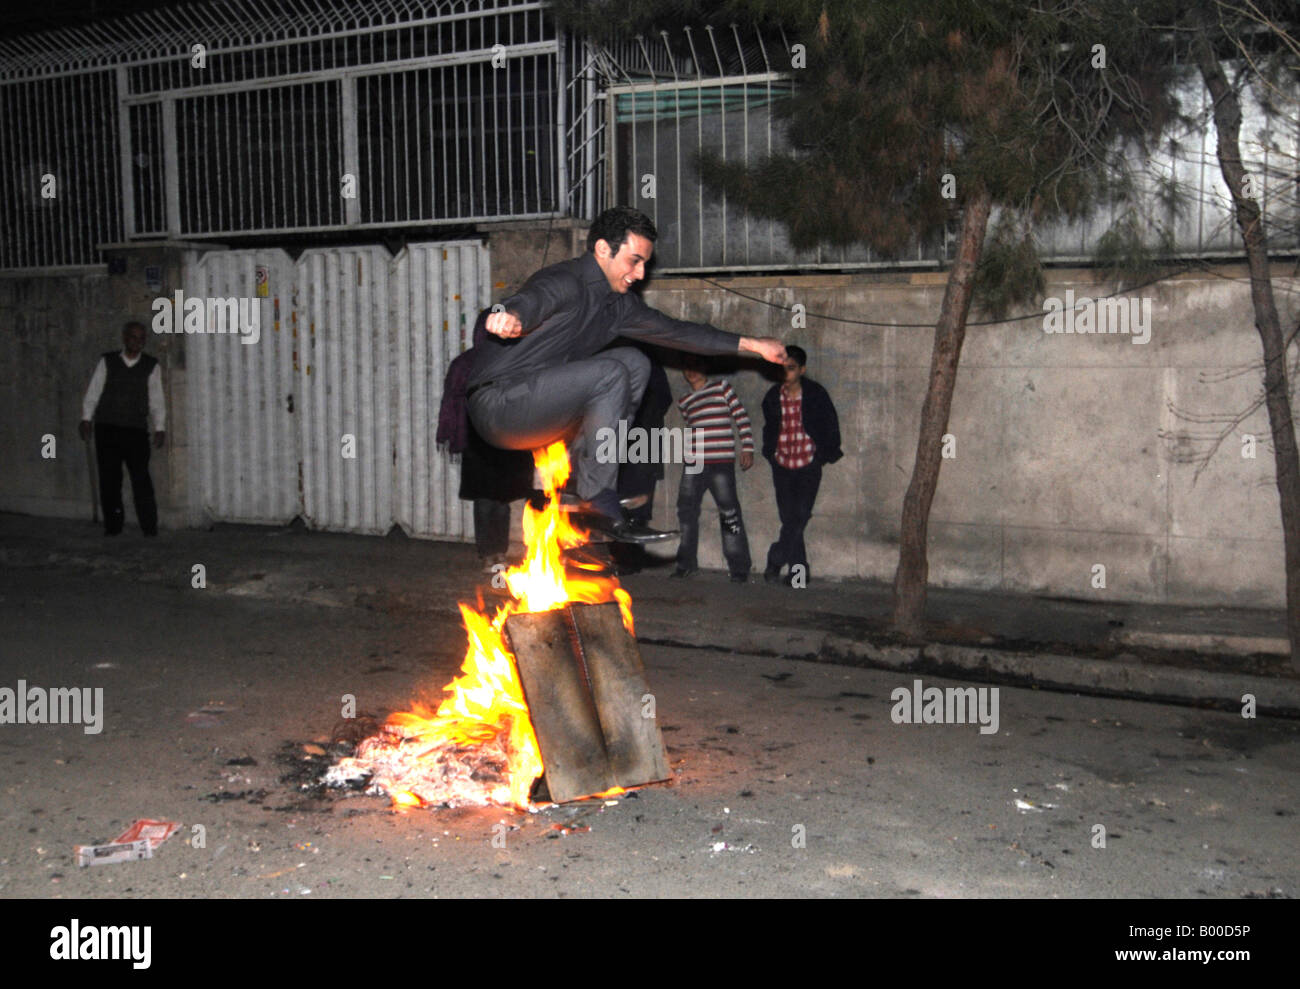 Iranian people jumping over bonfires during the festival of fire prior to the Persian new year, iphoto taken in Tehran, Iran. Stock Photo